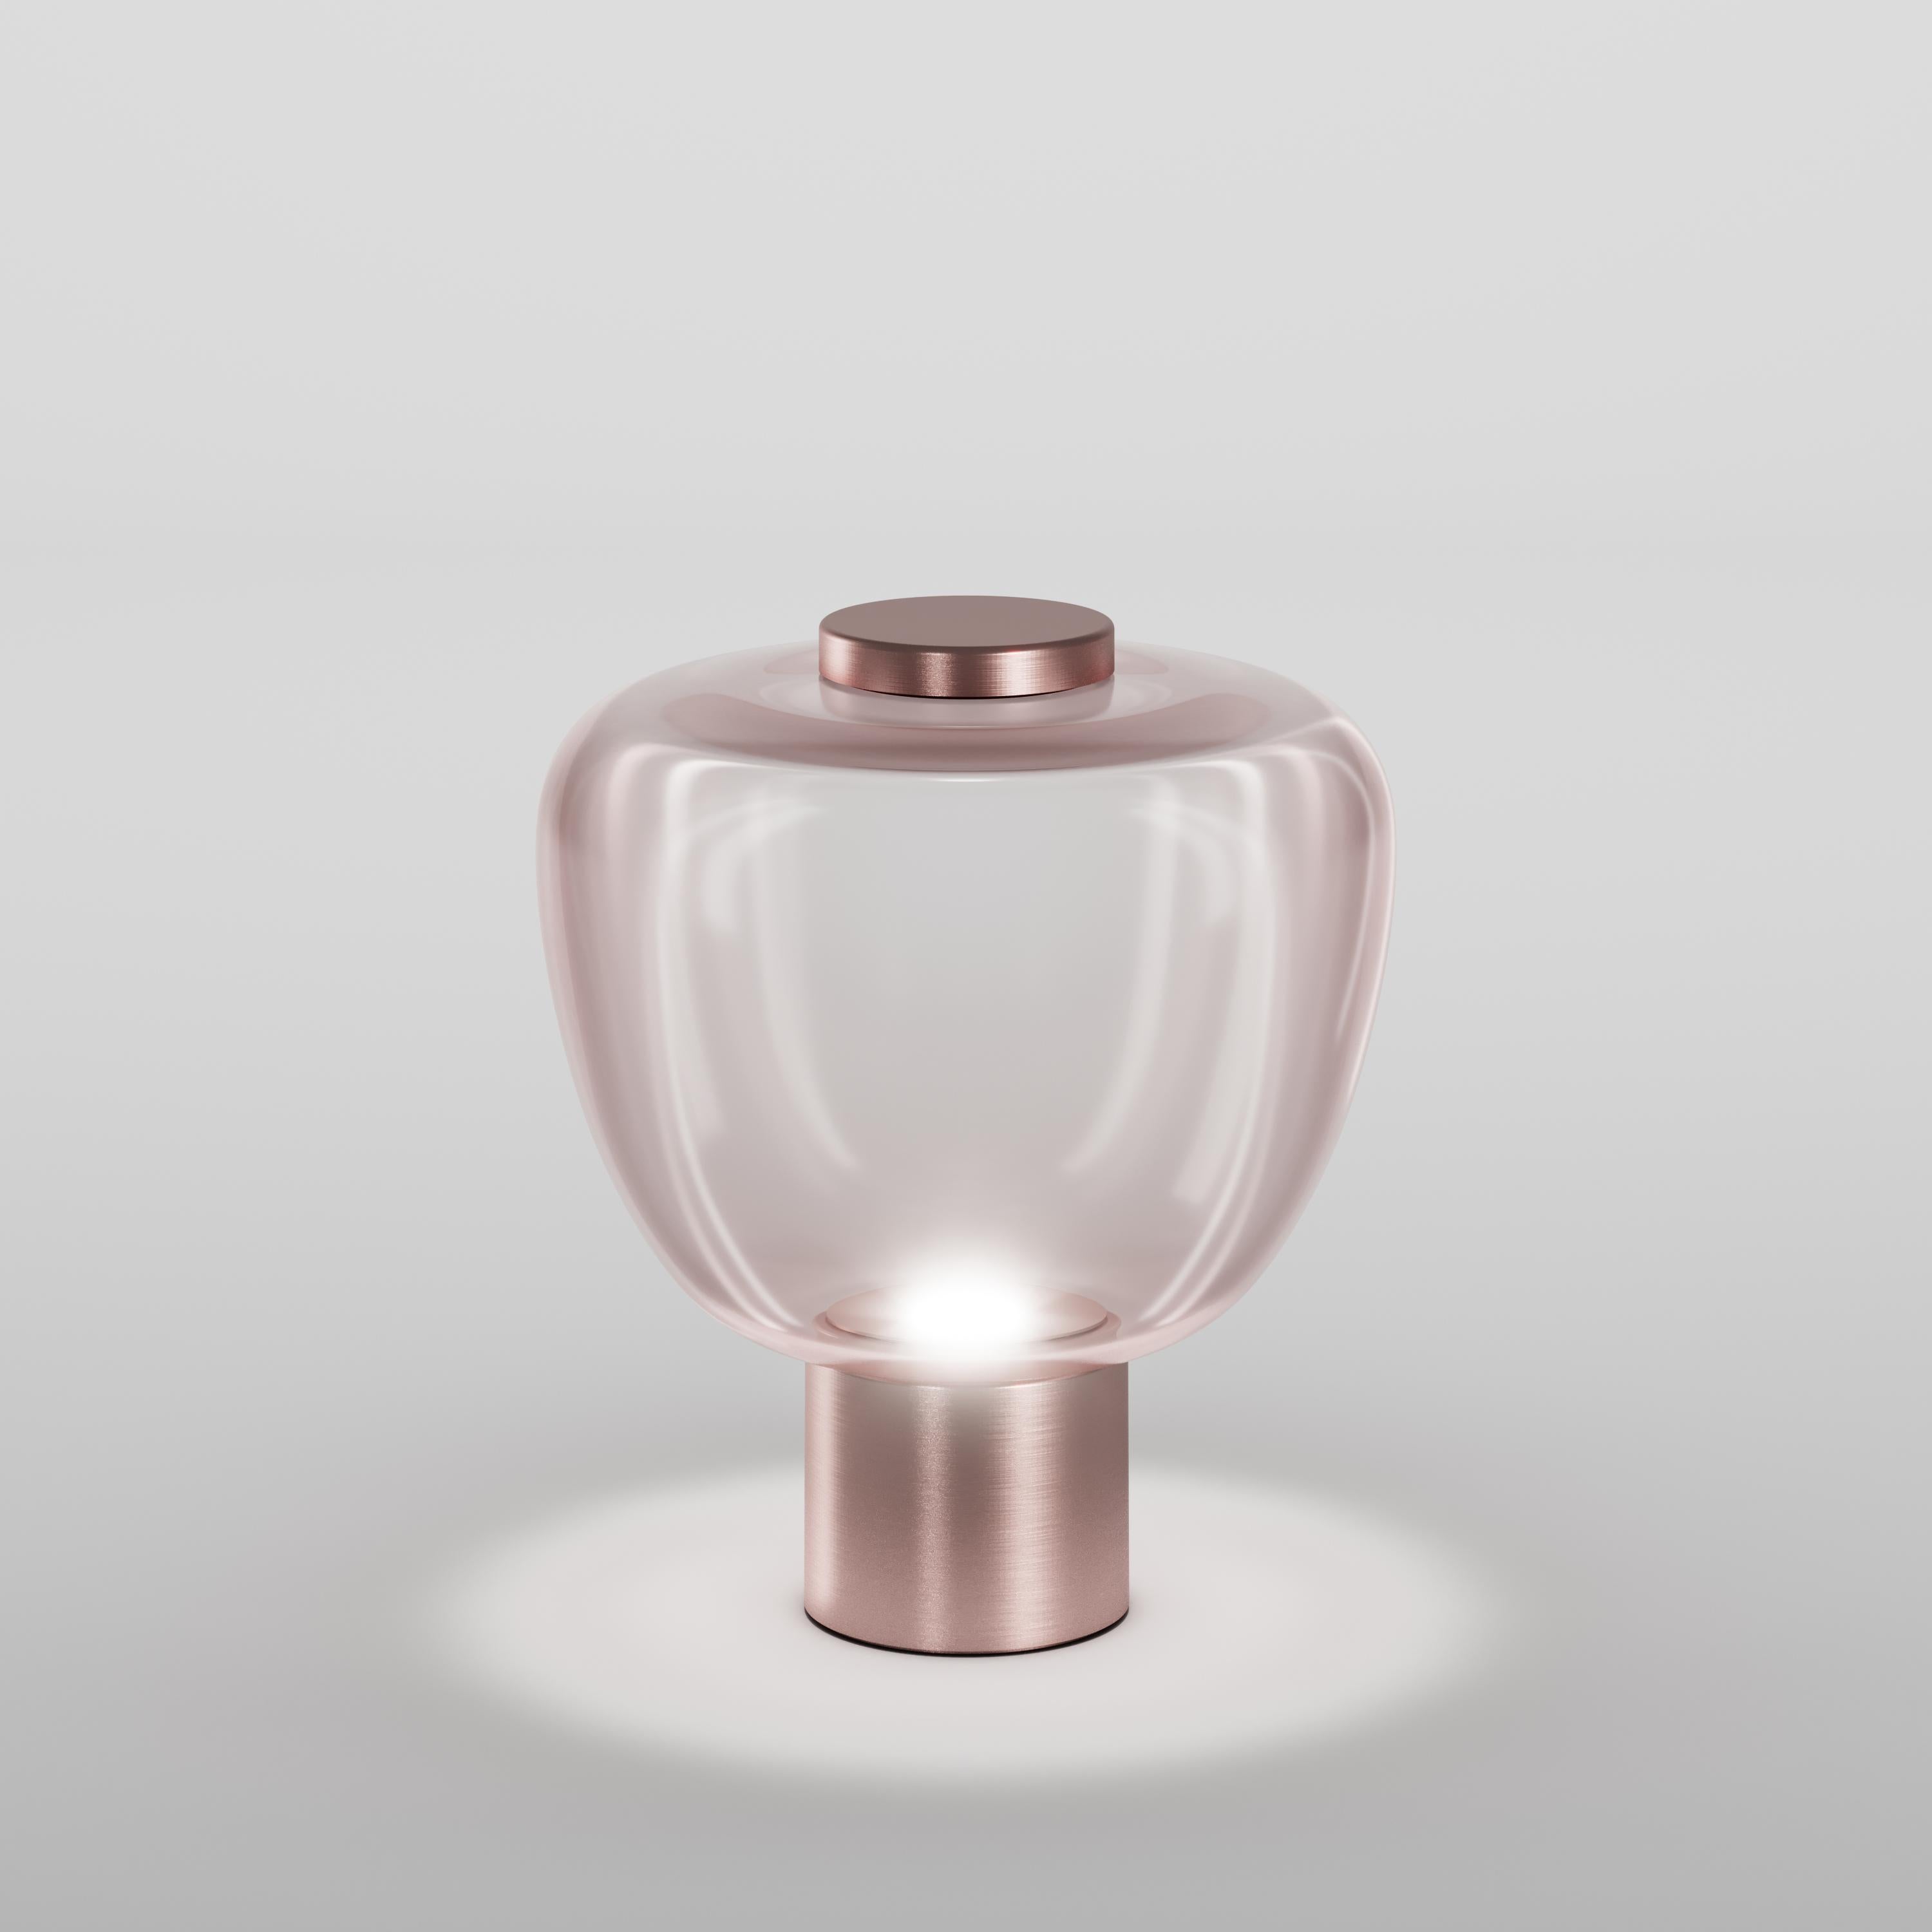 In the Riflesso collection the simplicity and lightness of glass become the main features with three different sinuous shapes. The silhouettes of the diffuser are enhanced by the LED light source.

Specifications:
Material: Glass
Light source: LED